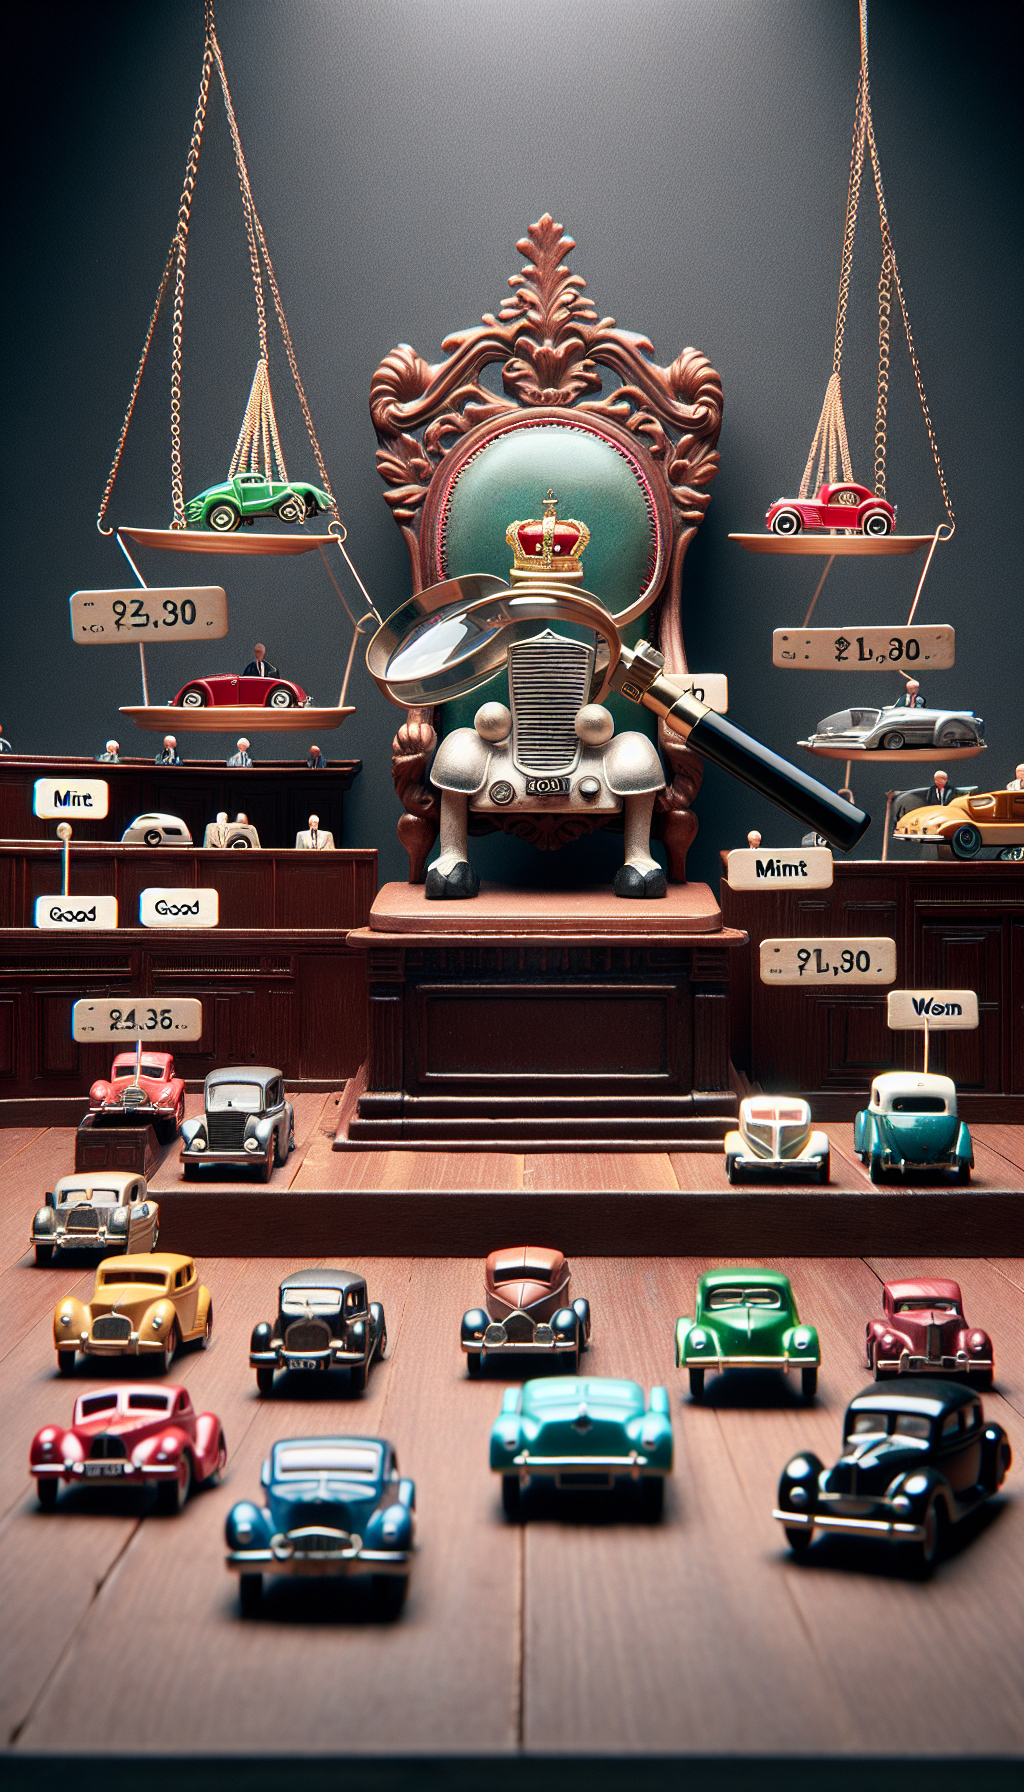 In the illustration, a regal courtroom scene unfolds with a whimsical twist: an anthropomorphic Matchbox car sits atop a majestic throne, a jeweler's loupe for a crown, presiding over a queue of vintage toy cars. Each car awaits its verdict, with condition indicators (mint, good, worn) floating above as court titles, while price tags dangle from their rearview mirrors, suggesting their value.